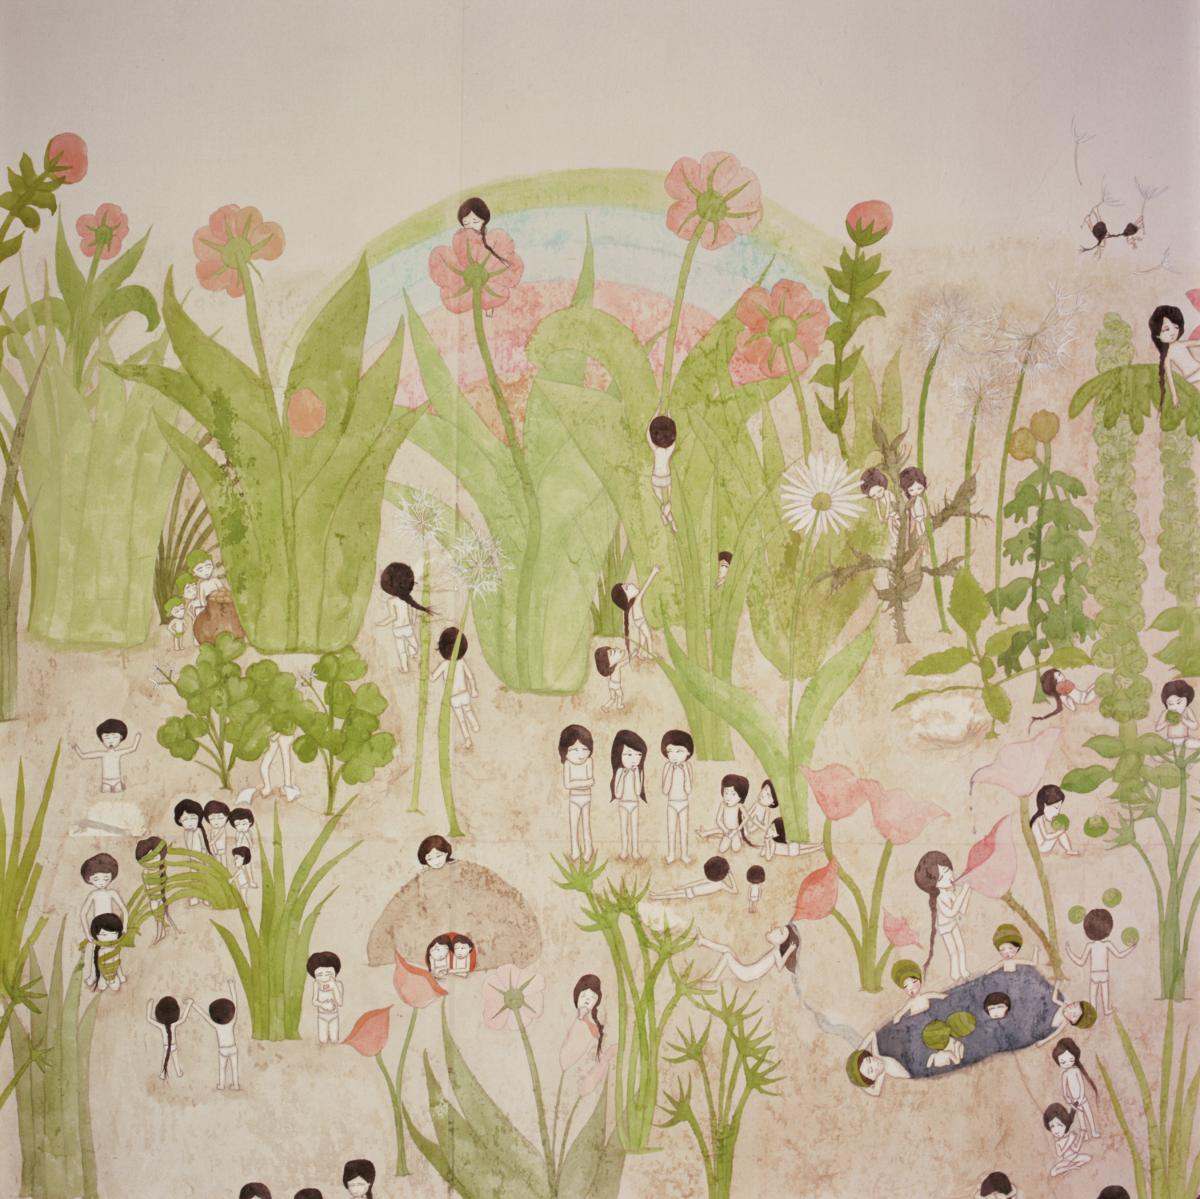 Artwork by Kyung Jeon titled little persons, big steps, 2009, Pencil and watercolor on rice paper on canvas, 60.5 x 78.25 inches, 153.7 x 198.8 cm